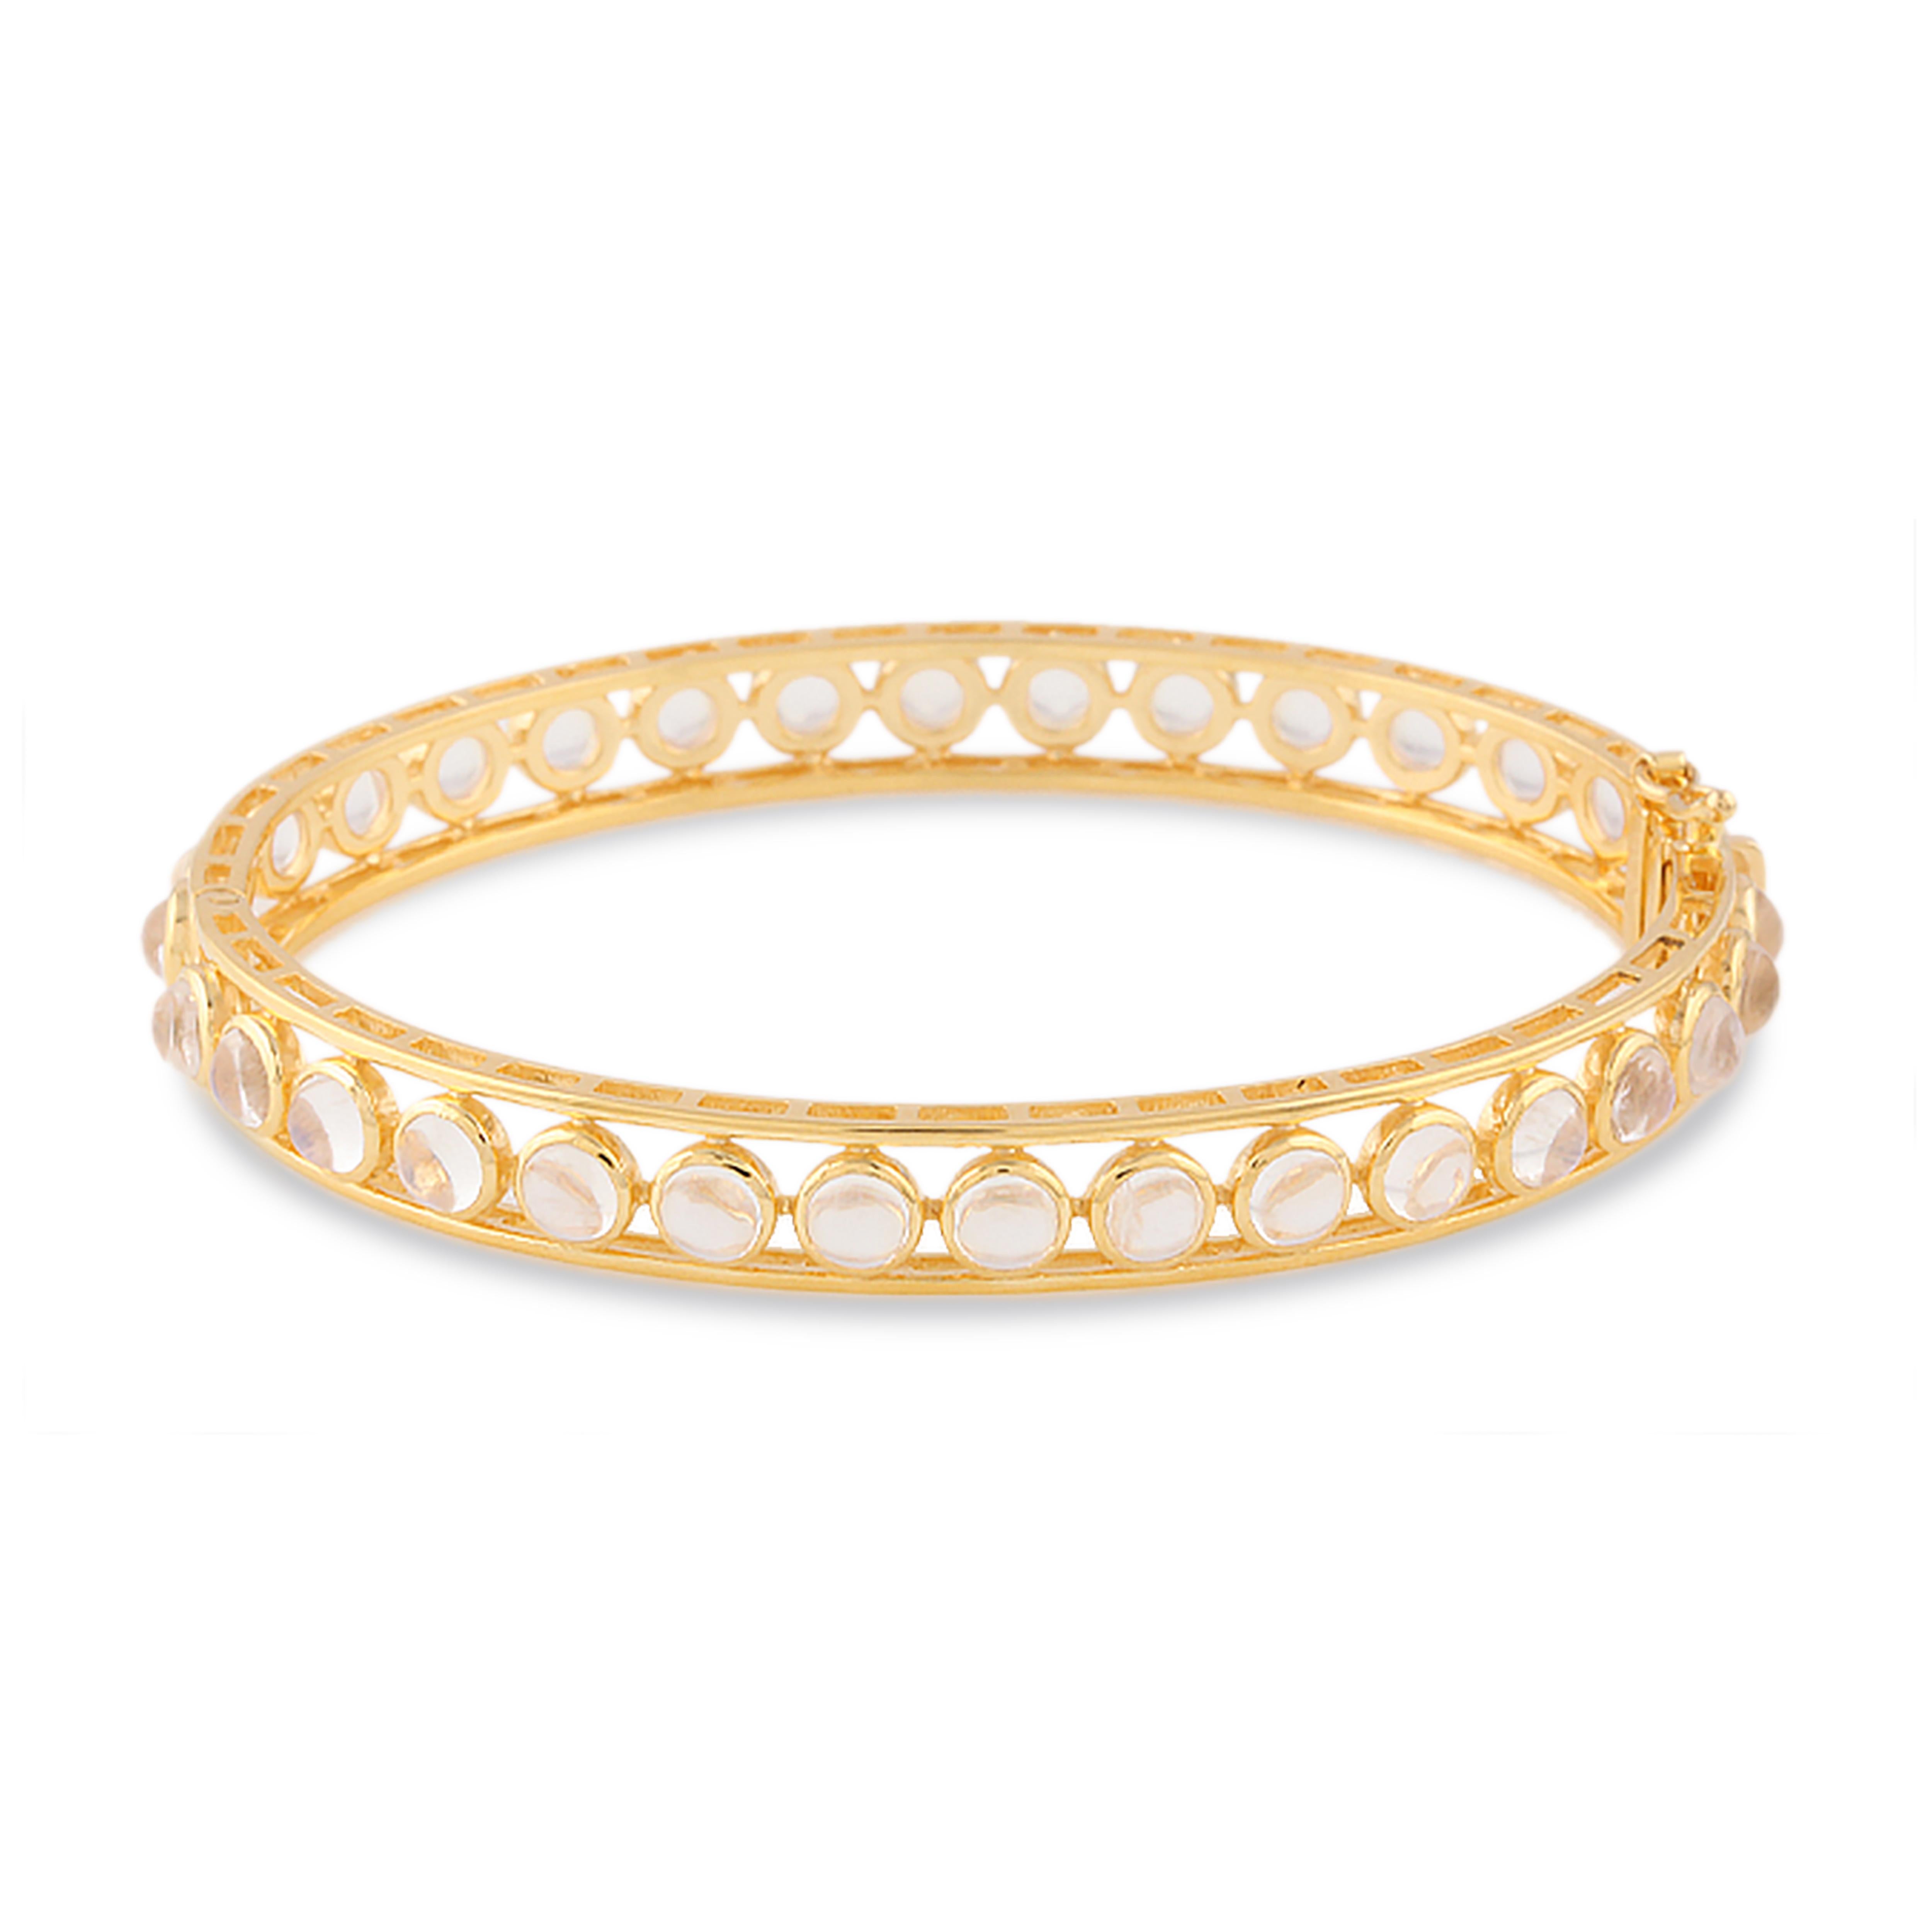 Tresor Rainbow Moonstone Bangle features 8.00 cts Rainbow Moonstone in 18k yellow gold. The Bracelet are an ode to the luxurious yet classic beauty with sparkly diamonds. Their contemporary and modern design makes them versatile in their use. The